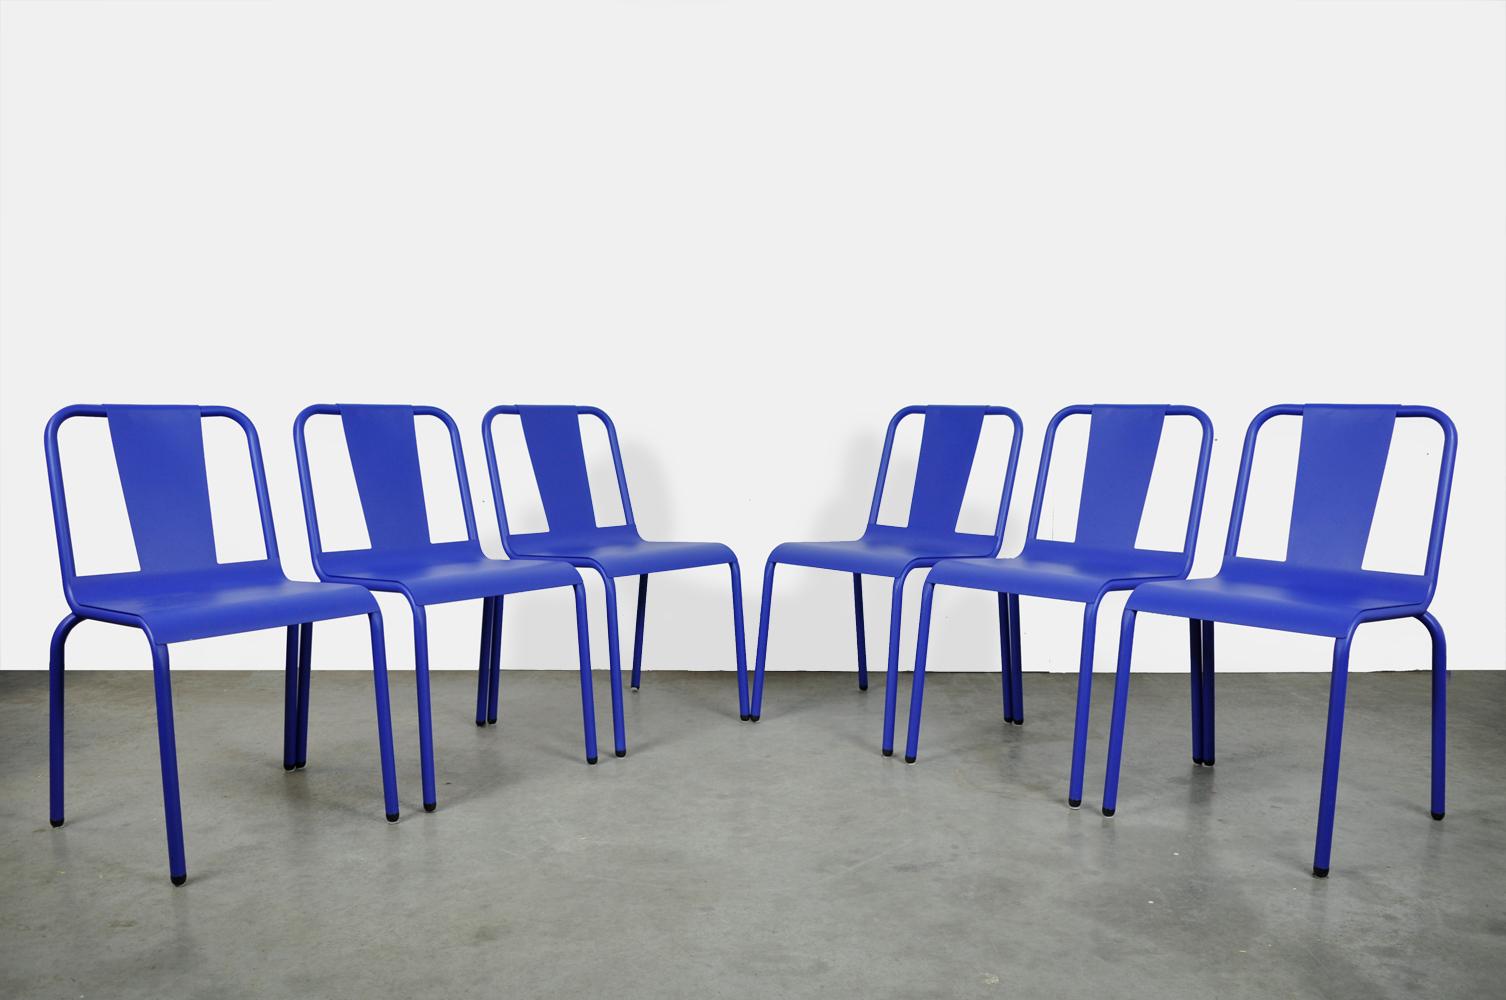 Set of 6 Design Chairs by Isi Design Group, Produced by Isimar, 2000 Spain 1